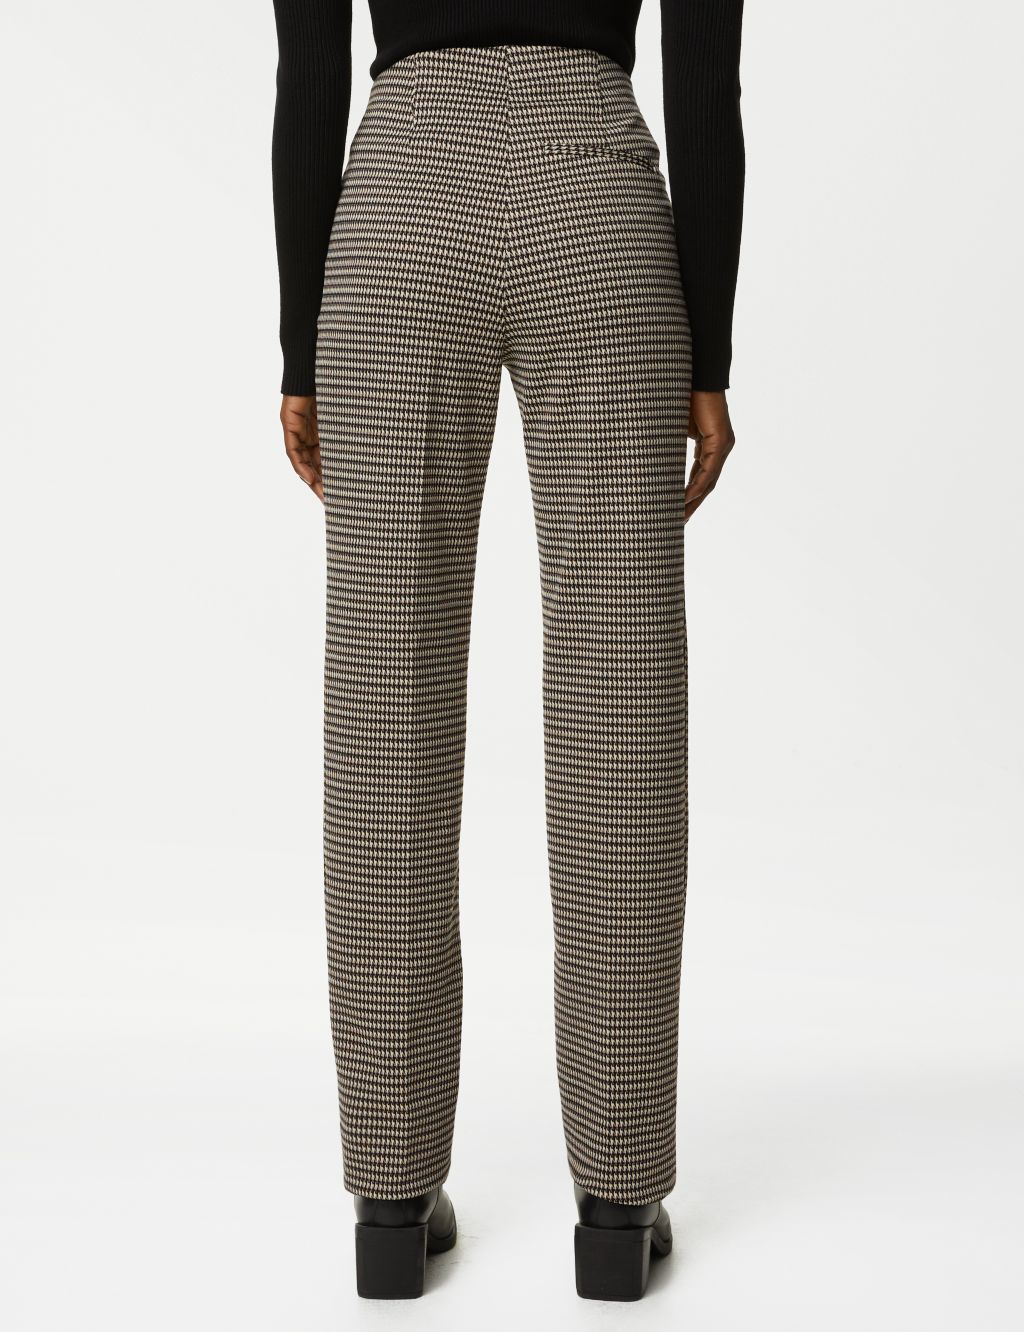 Twill Jersey Houndstooth Pintuck Trousers image 5